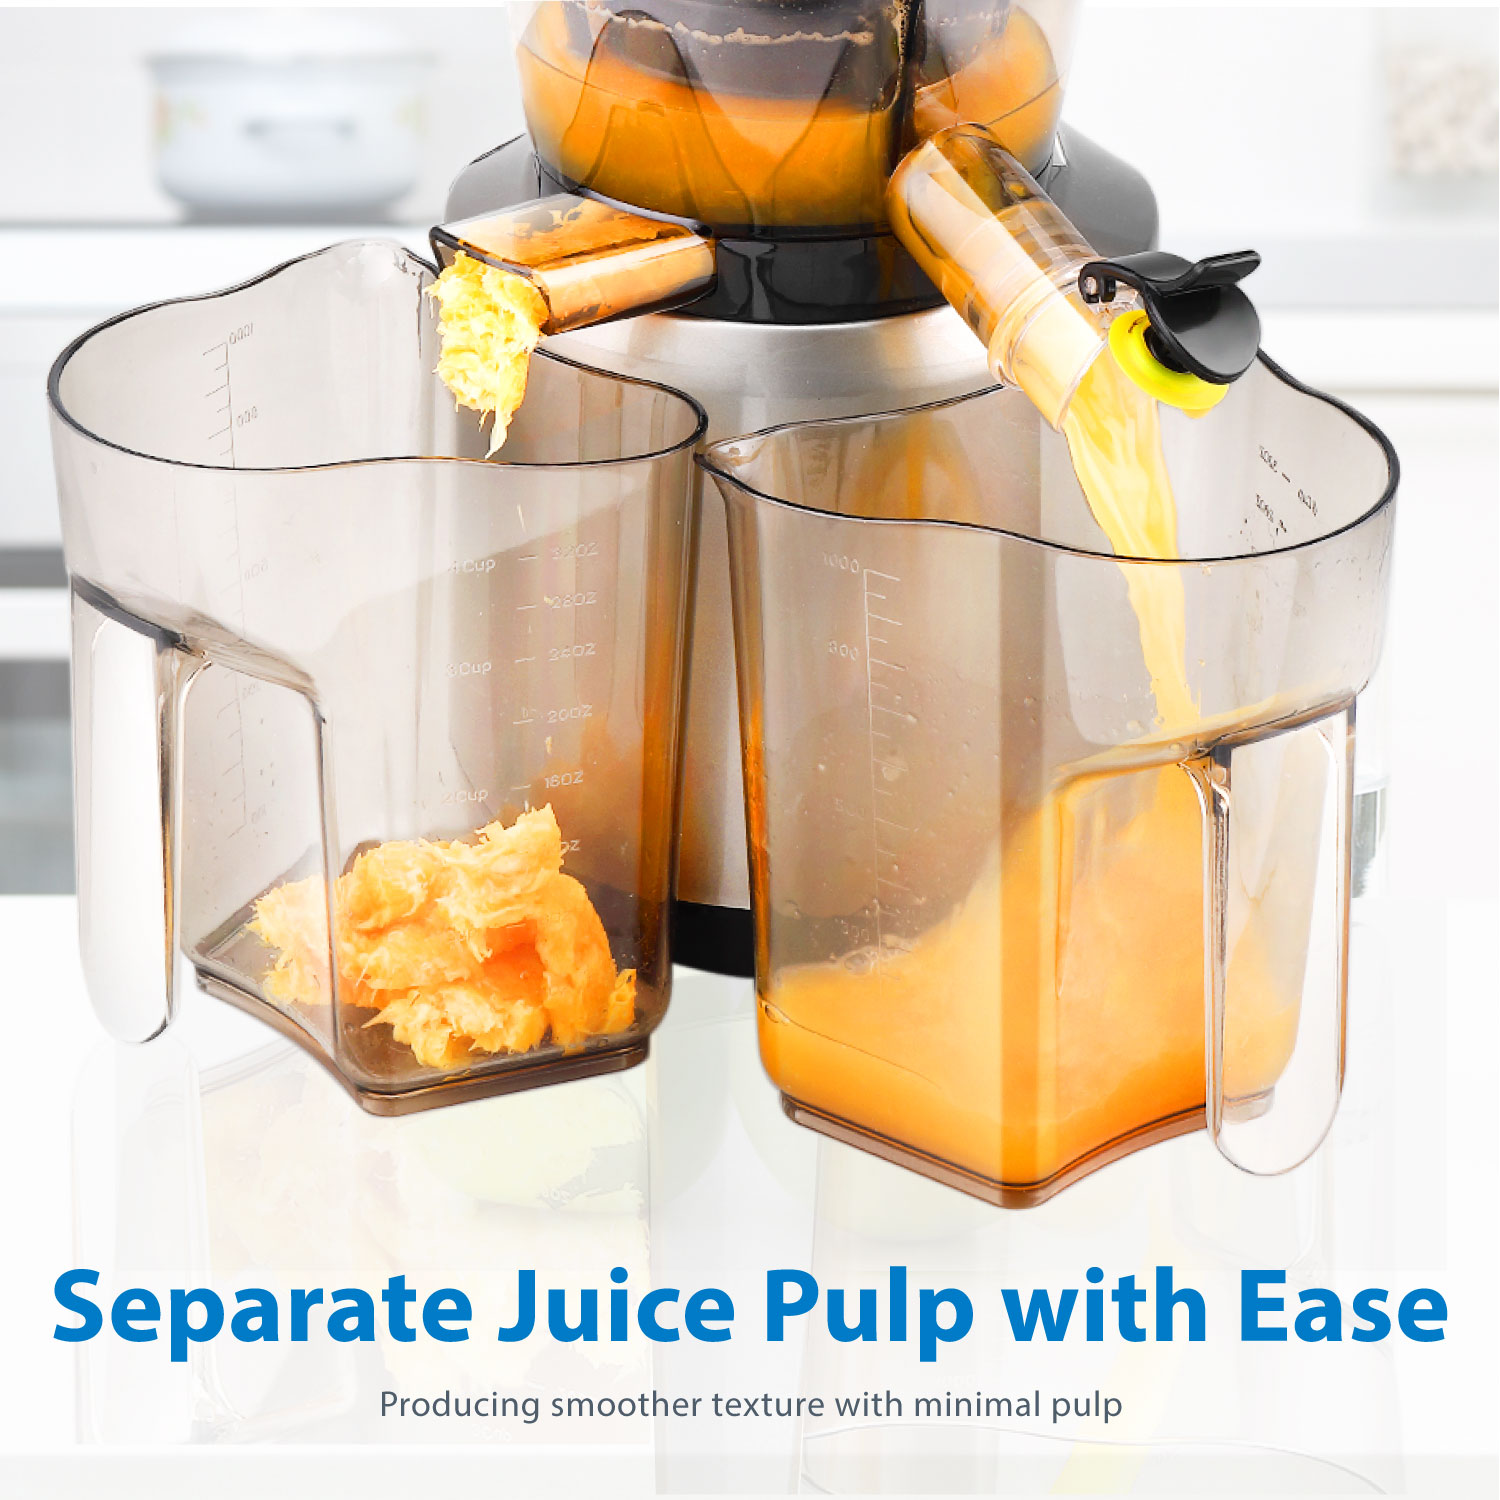 Wide mouth feed tube to accommodate most produce whole; juice without precutting. Multi purpose juicer works with both fruits and vegetables; Support continuous juicing with automatic pulp ejection with separate juice outlet and pulp outlet